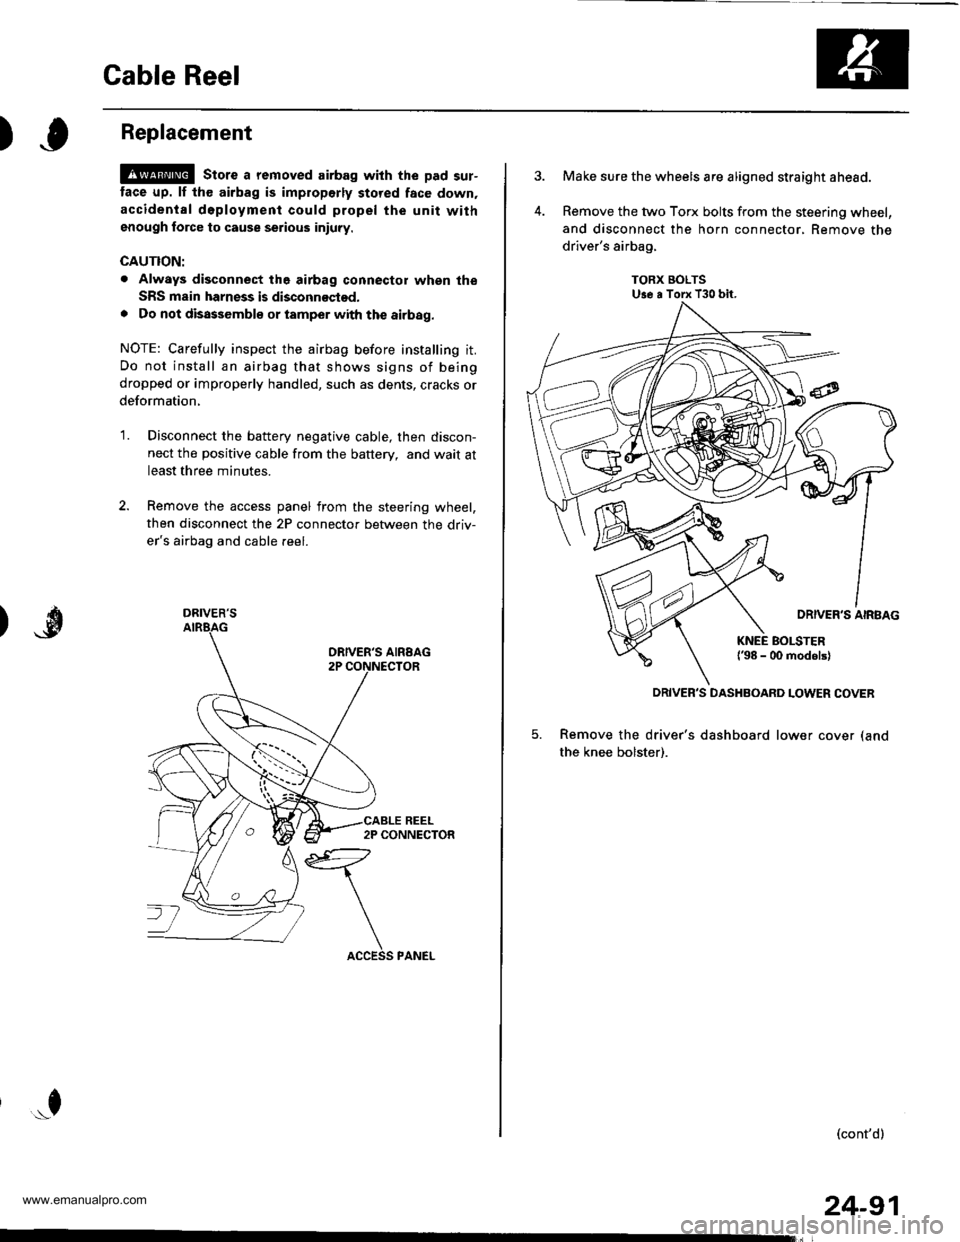 HONDA CR-V 1999 RD1-RD3 / 1.G Workshop Manual 
Cable Reel
)Replacement
@ stors a removed airbag with the pad sur-
tace up. lf th€ airbag is improperly stored face down,
accidental d6ployment could propel the unit withgnough force to cause serio